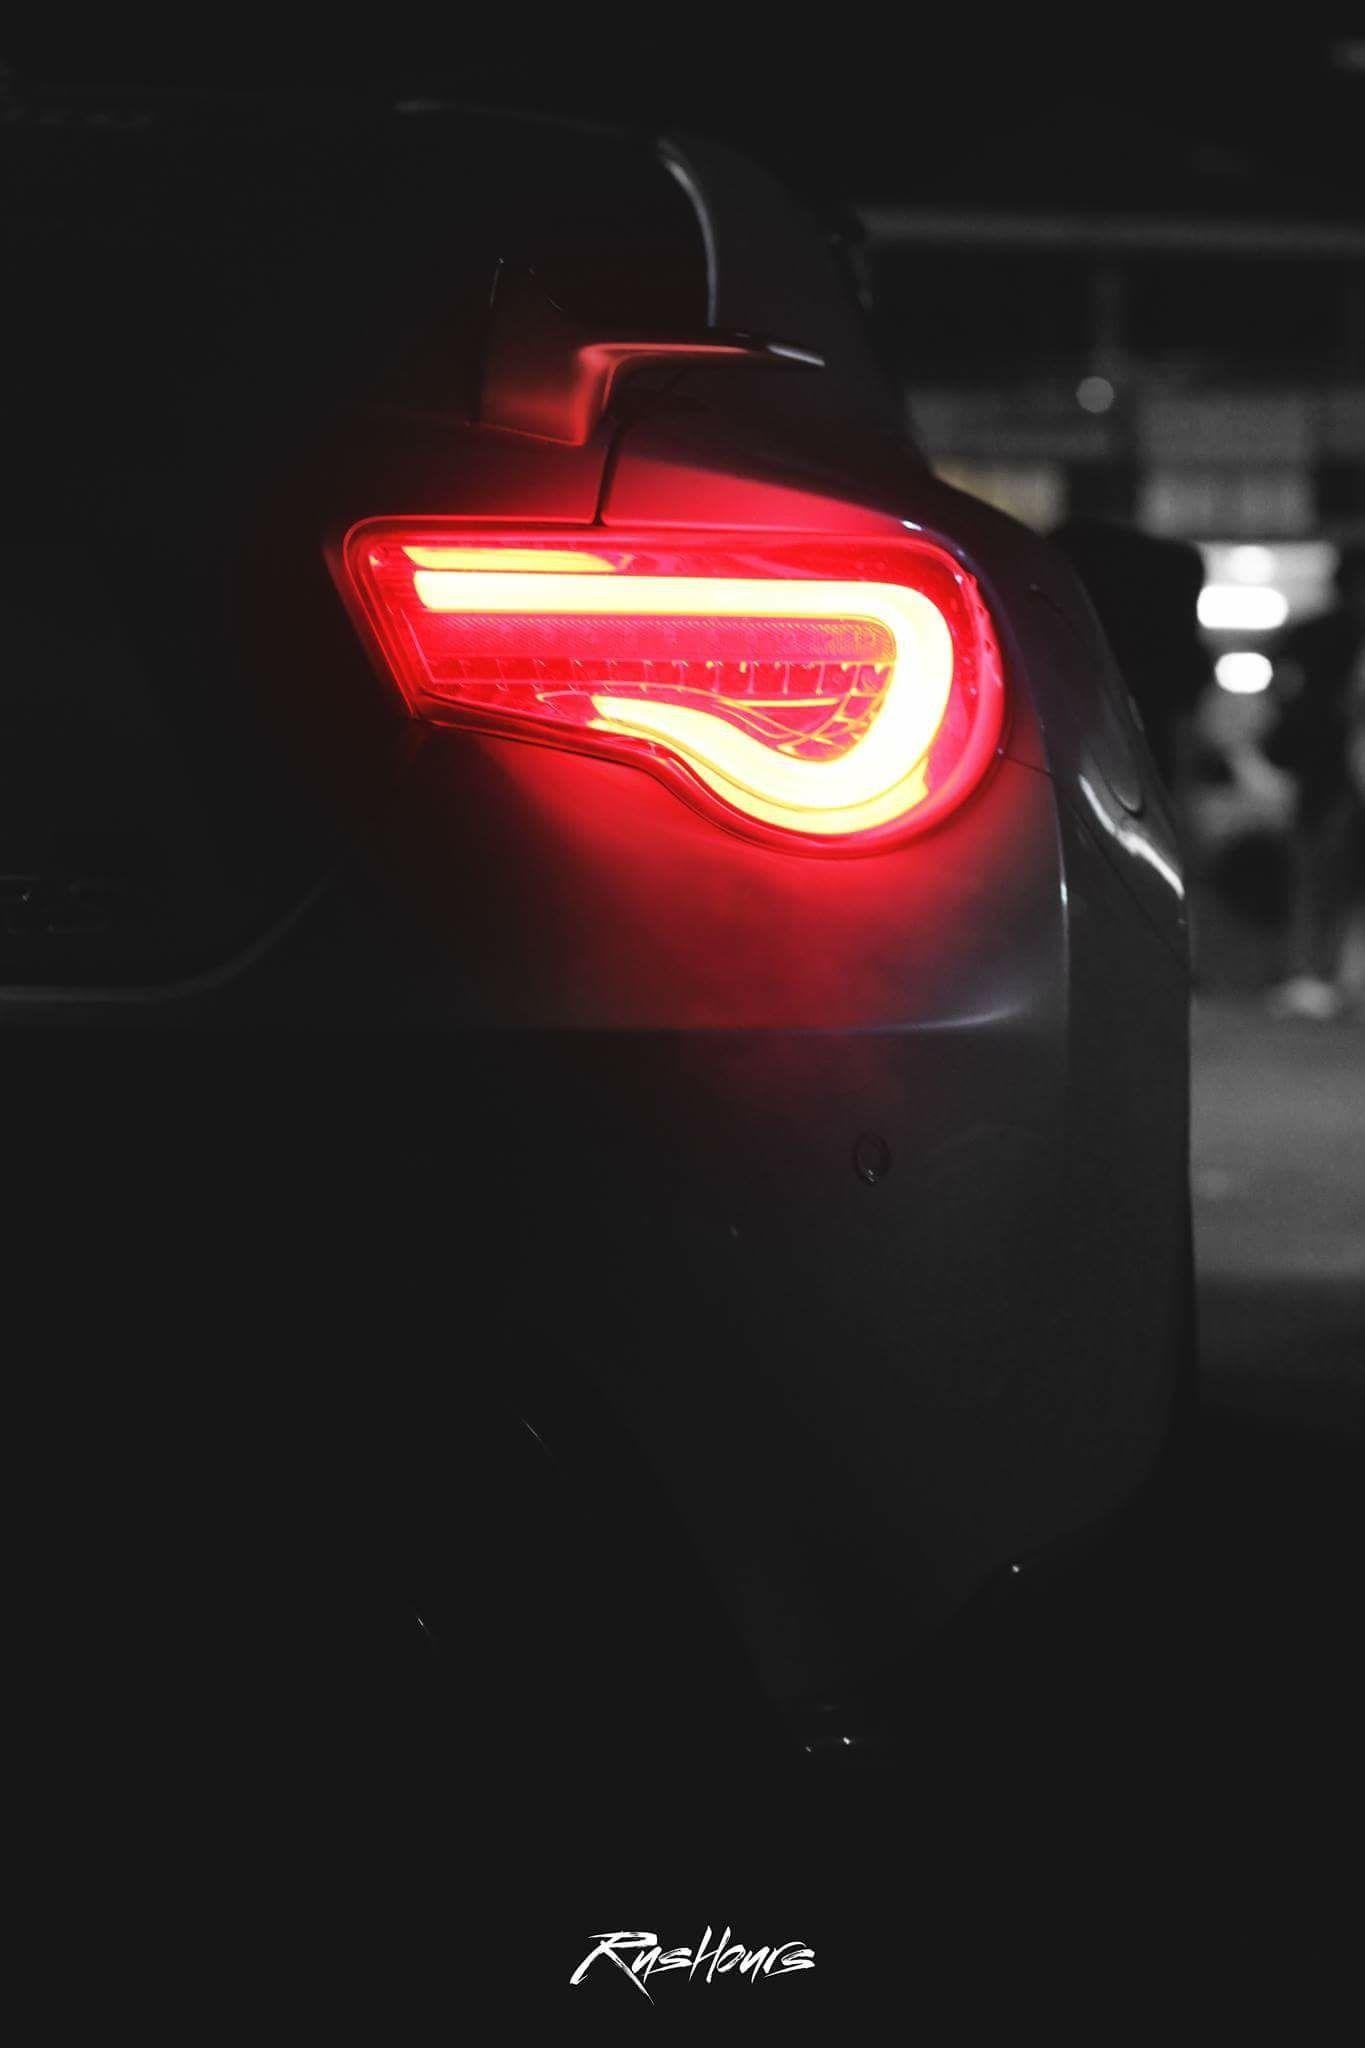 Brz iphone wallpaper #madmolre. Stance nation. Wallpaper, iPhone